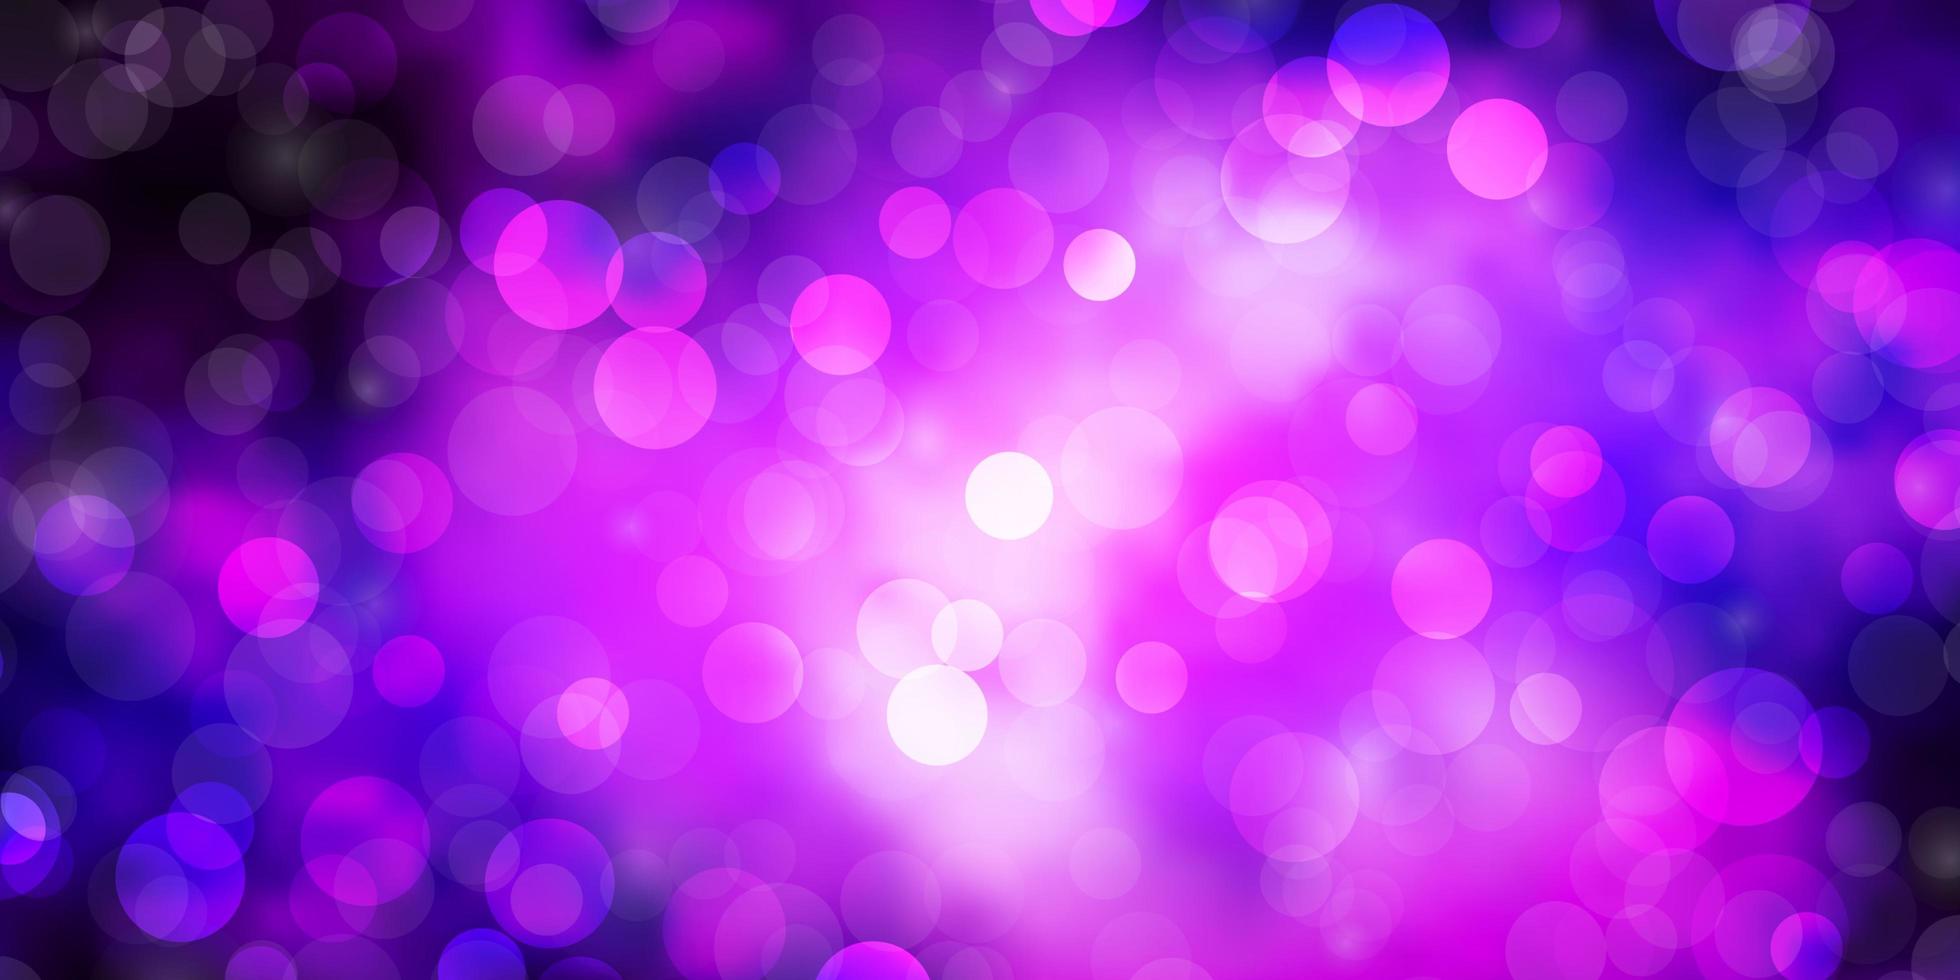 Dark Purple vector background with circles.